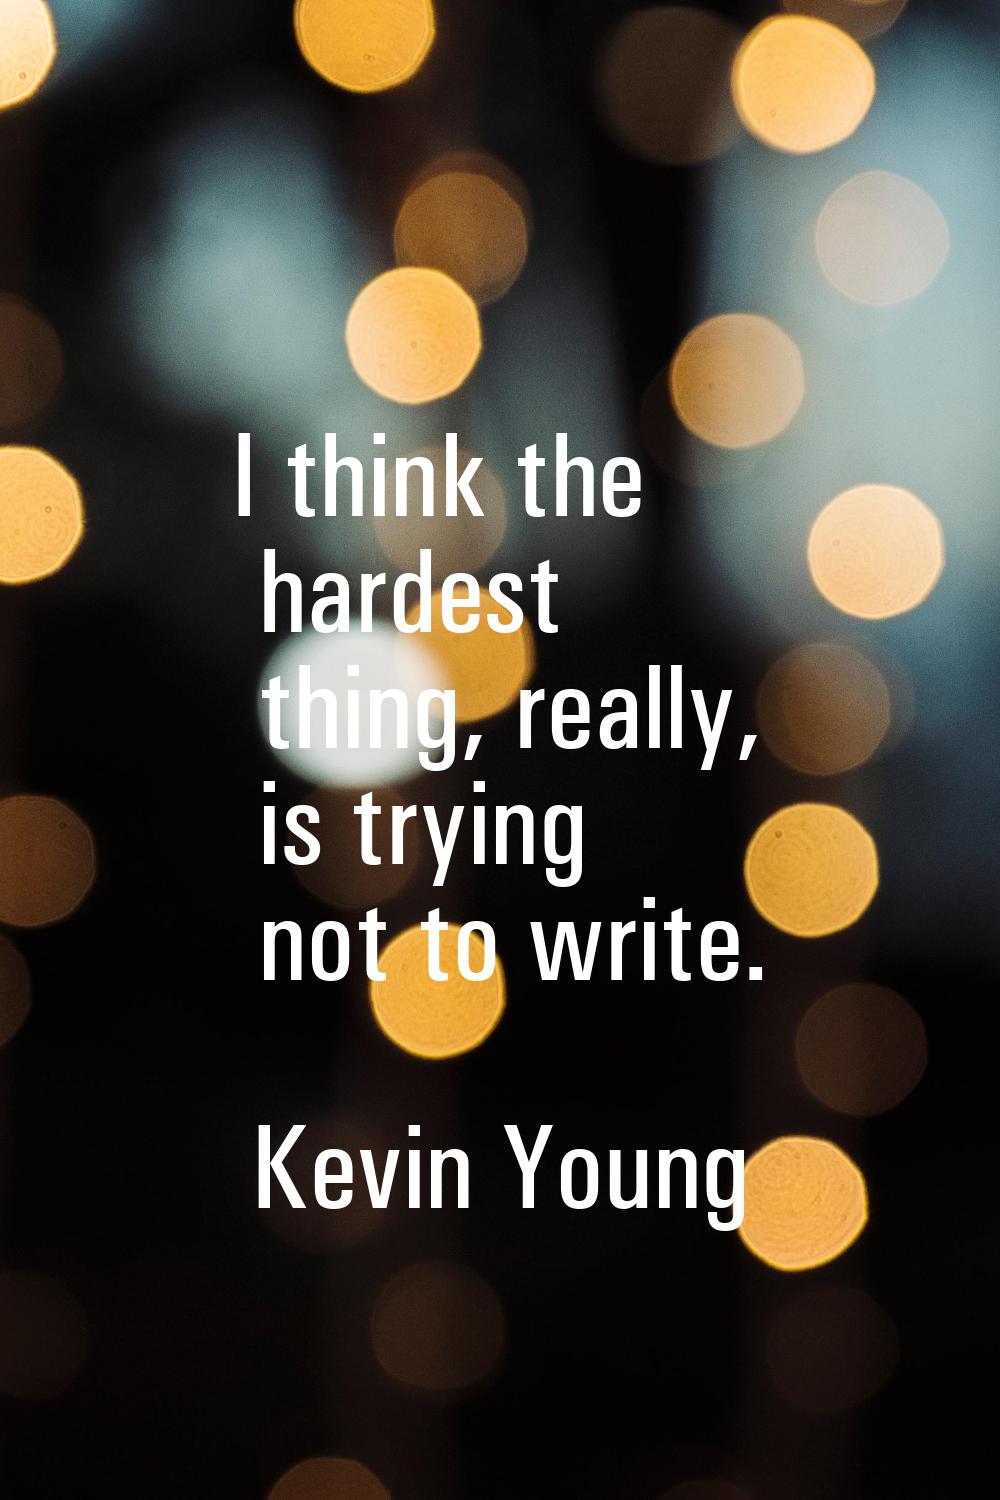 I think the hardest thing, really, is trying not to write.